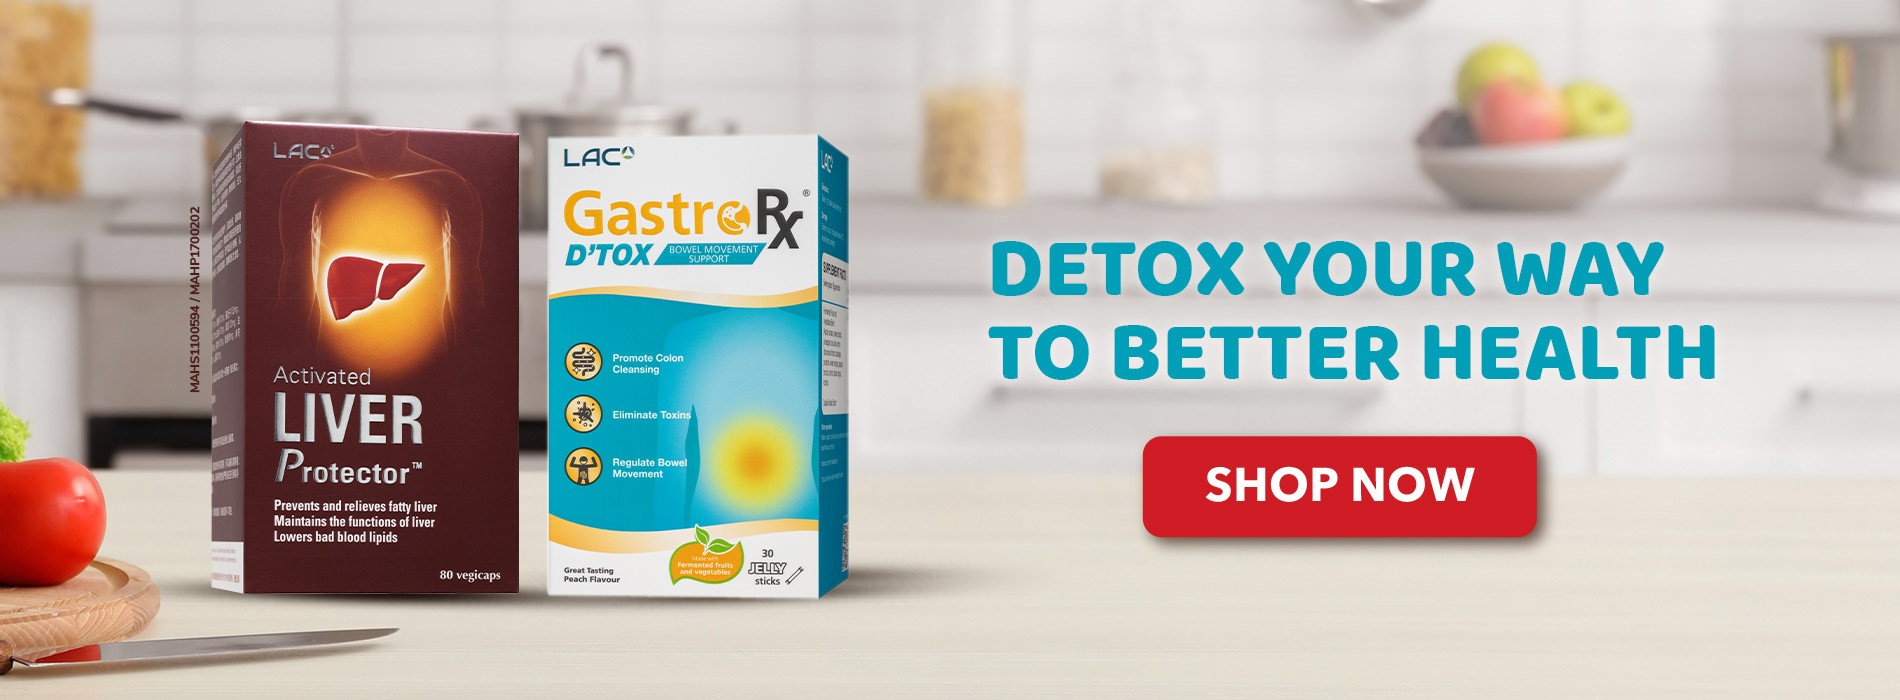 abccccccZ ABCCCC - Is Your Body In Need of Detox?